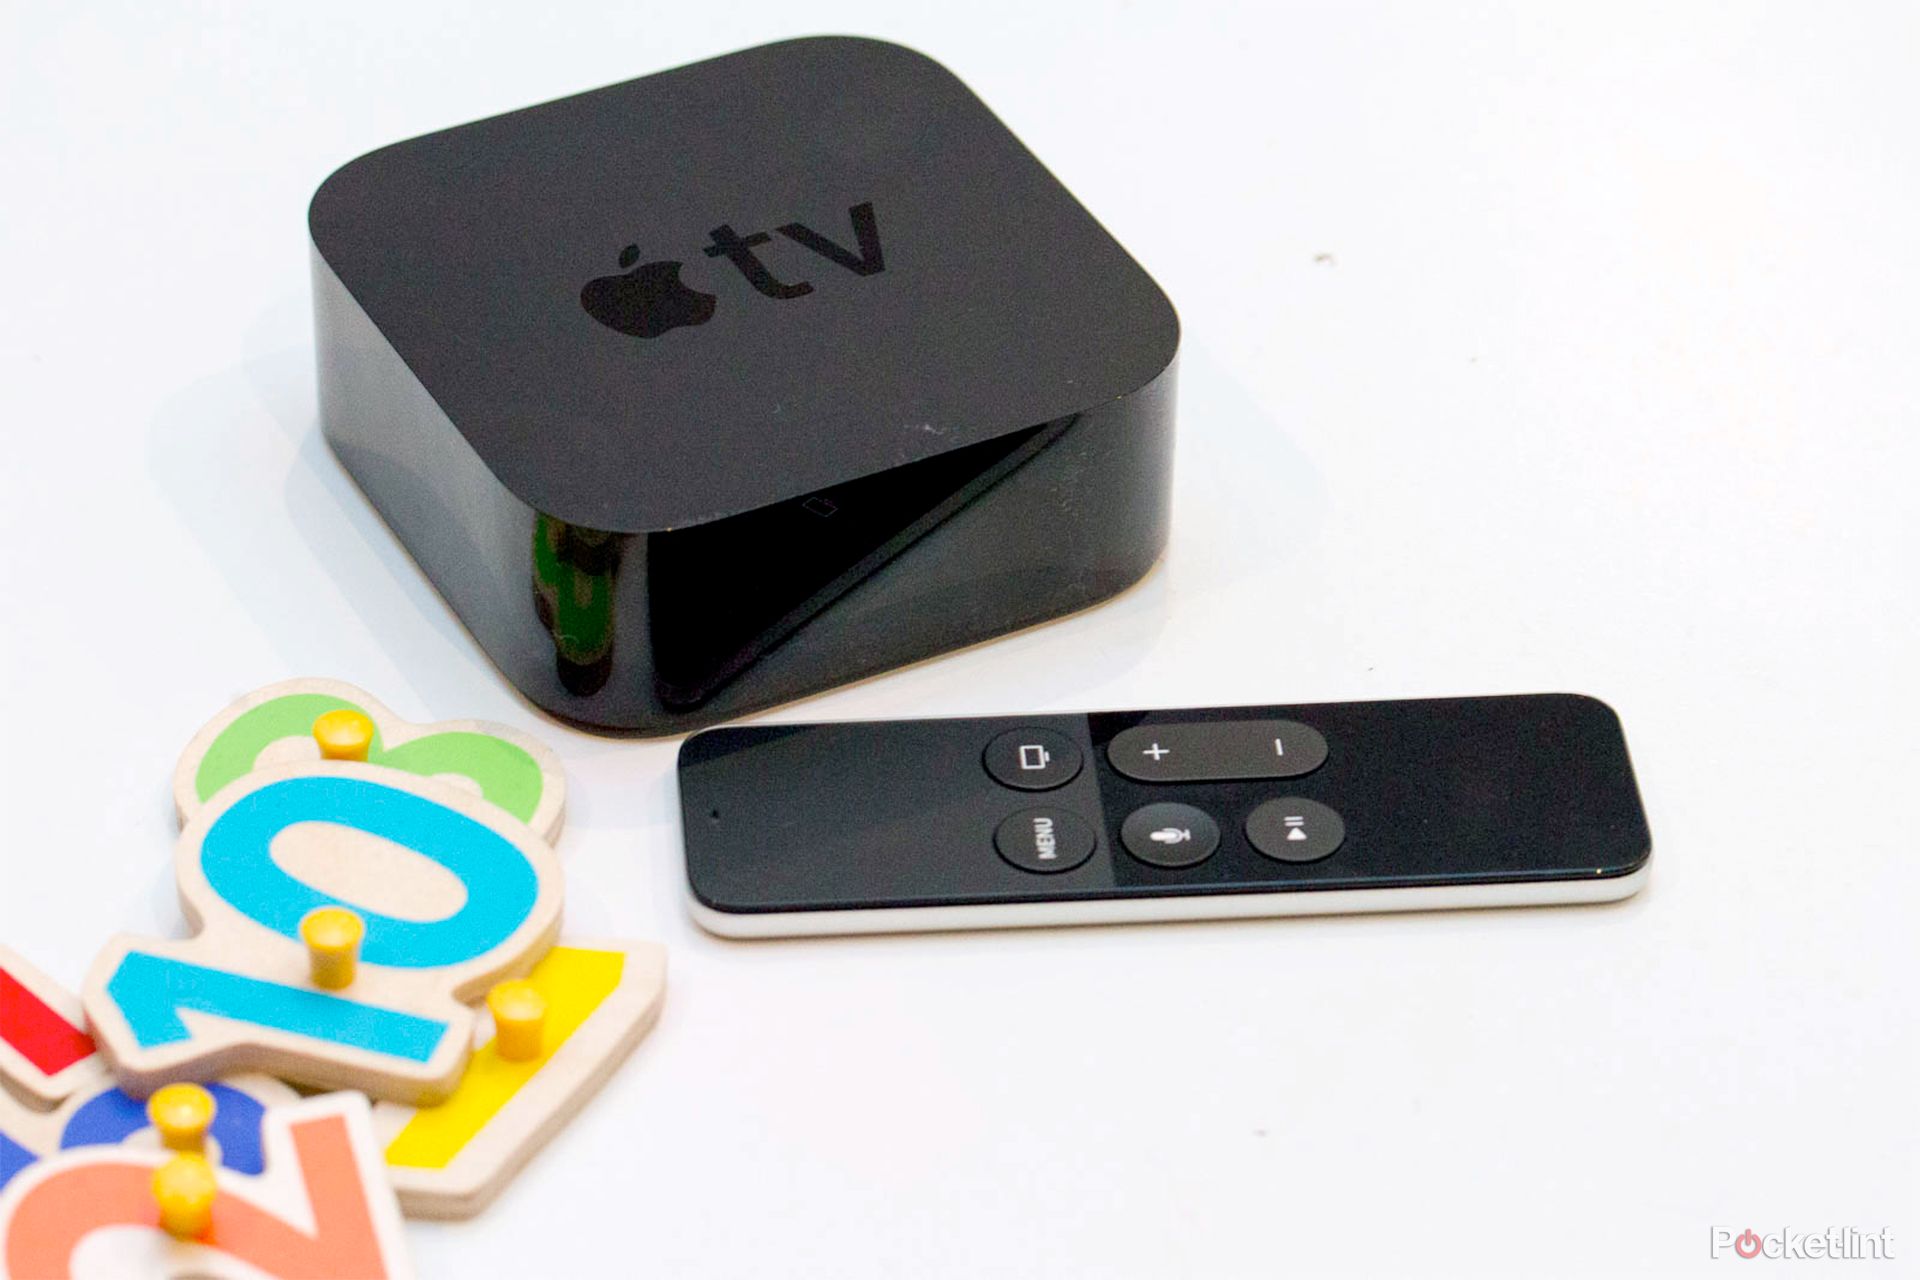 The next-gen Apple TV will feature an all-new remote photo 1